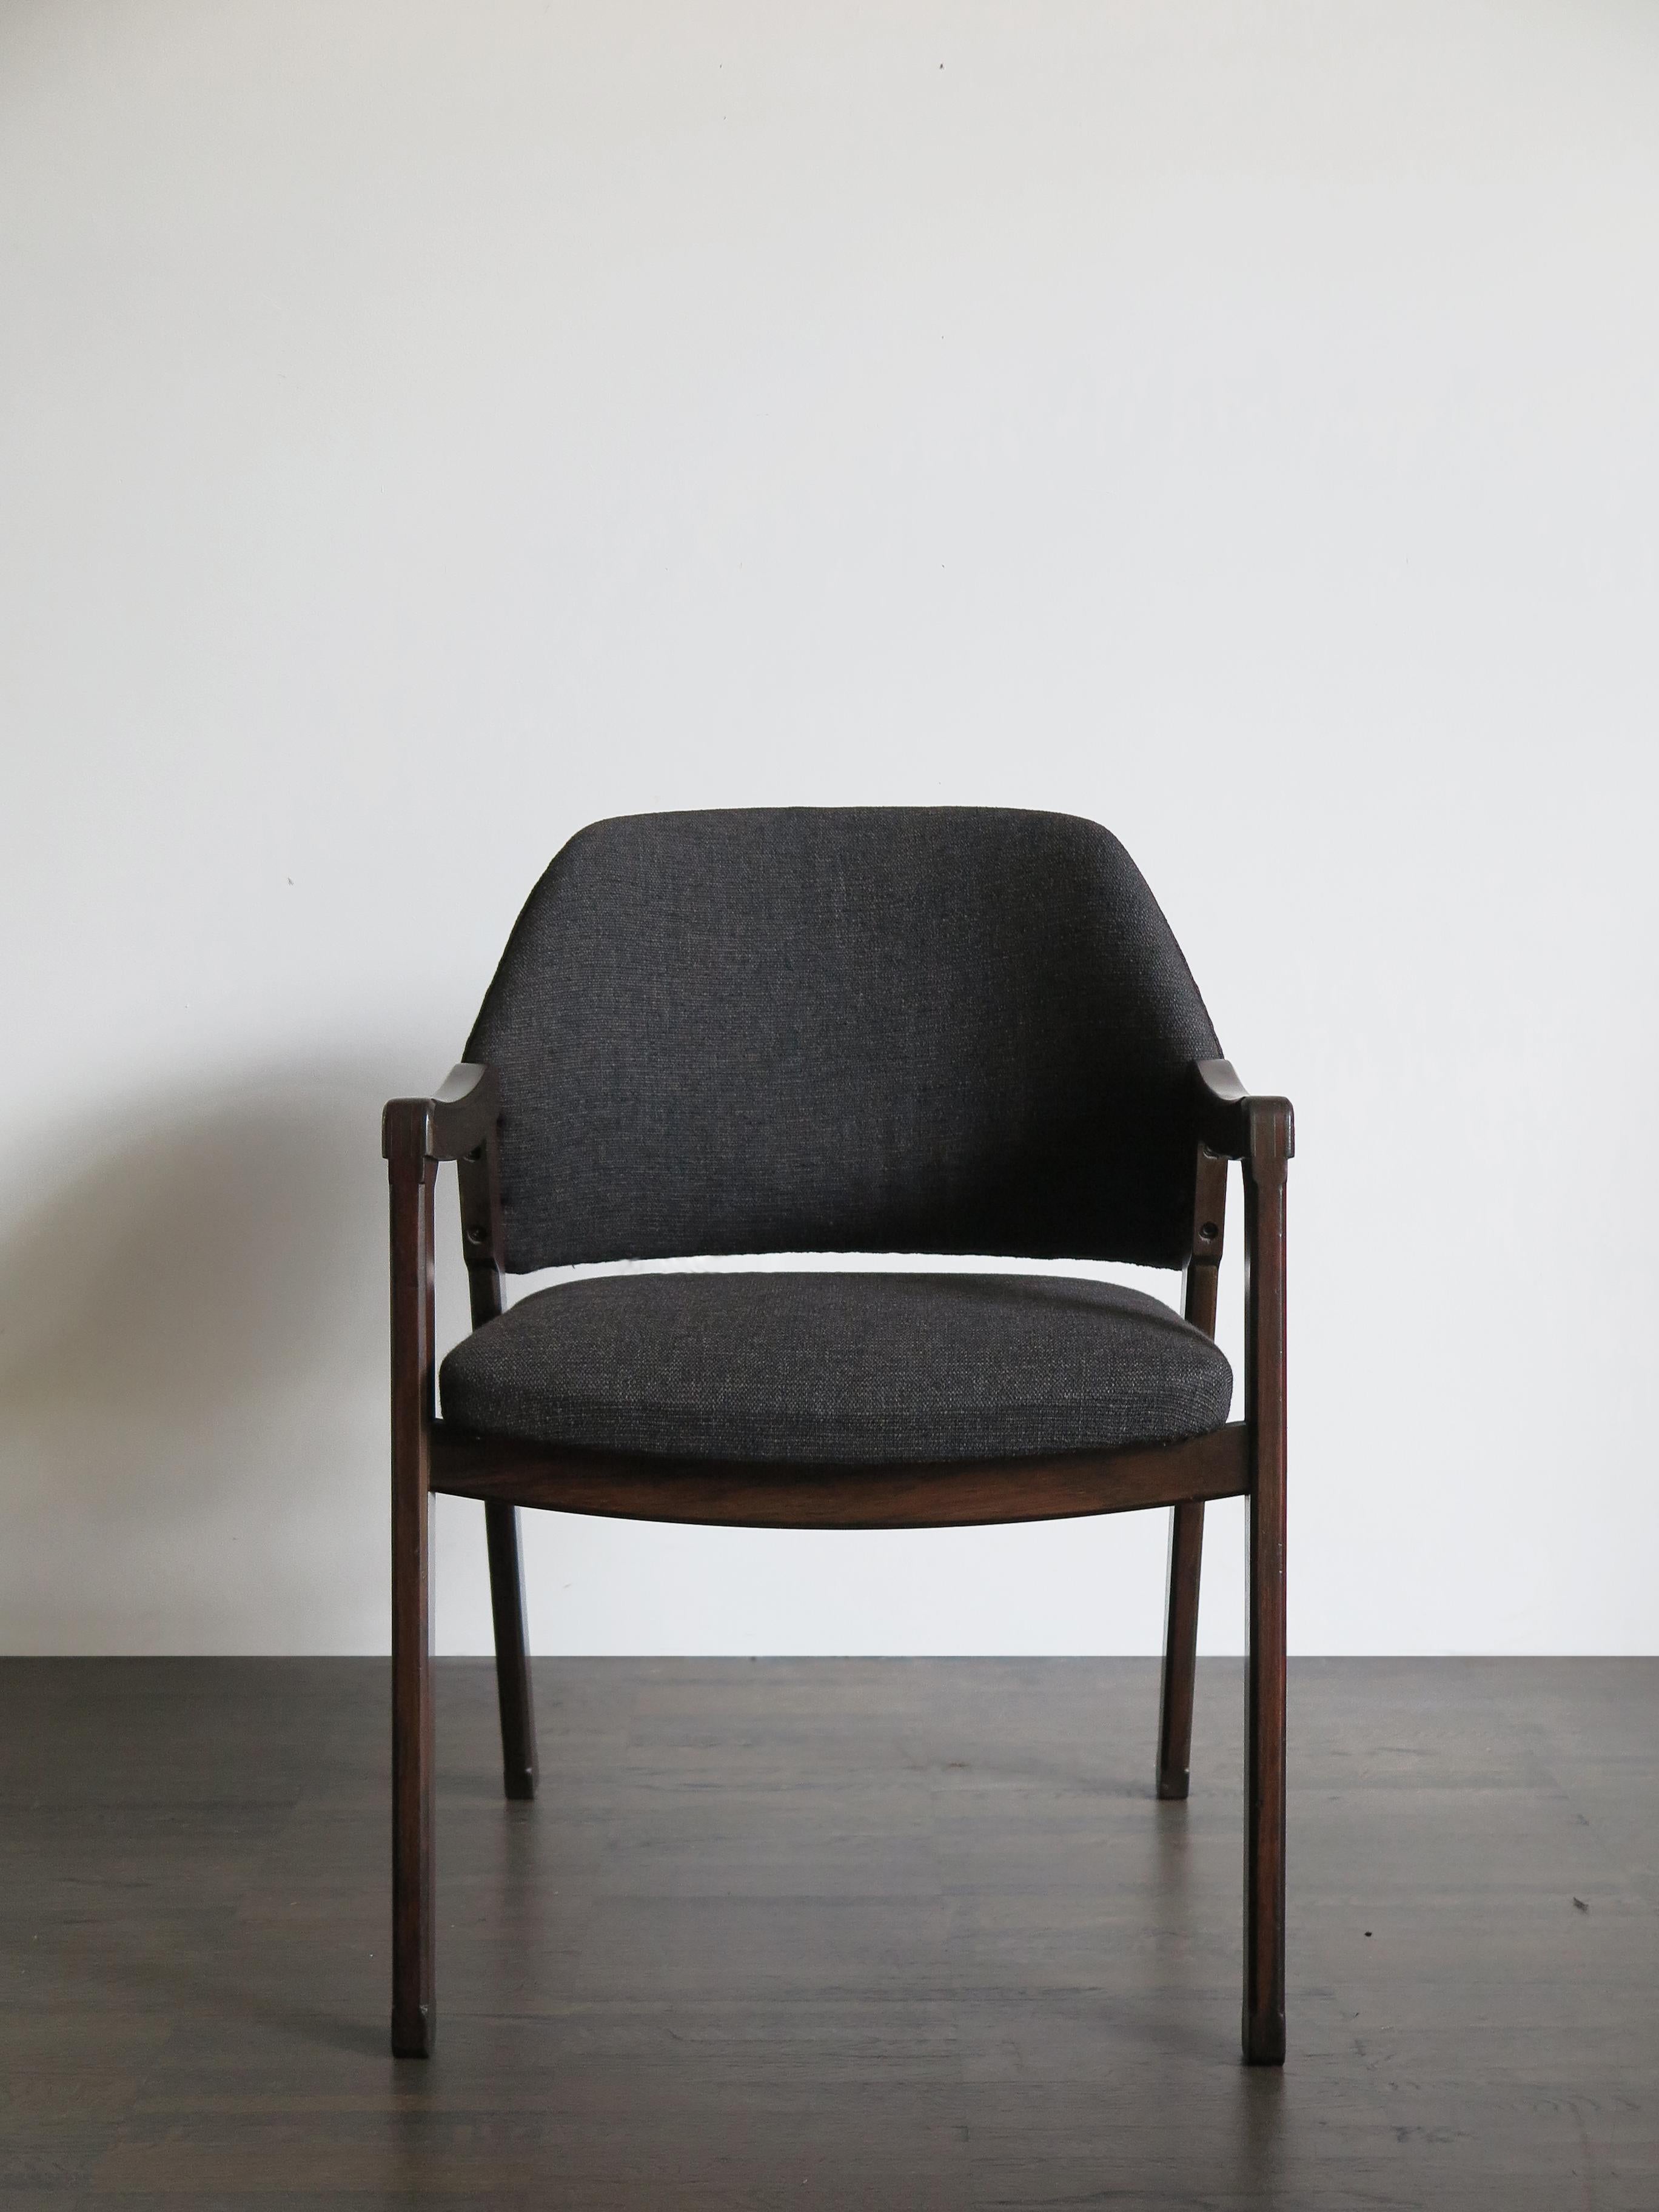 Mid-Century Modern Ico Parisi Italian Fabric and Wood Armchair Model 814 for Cassina, 1960s